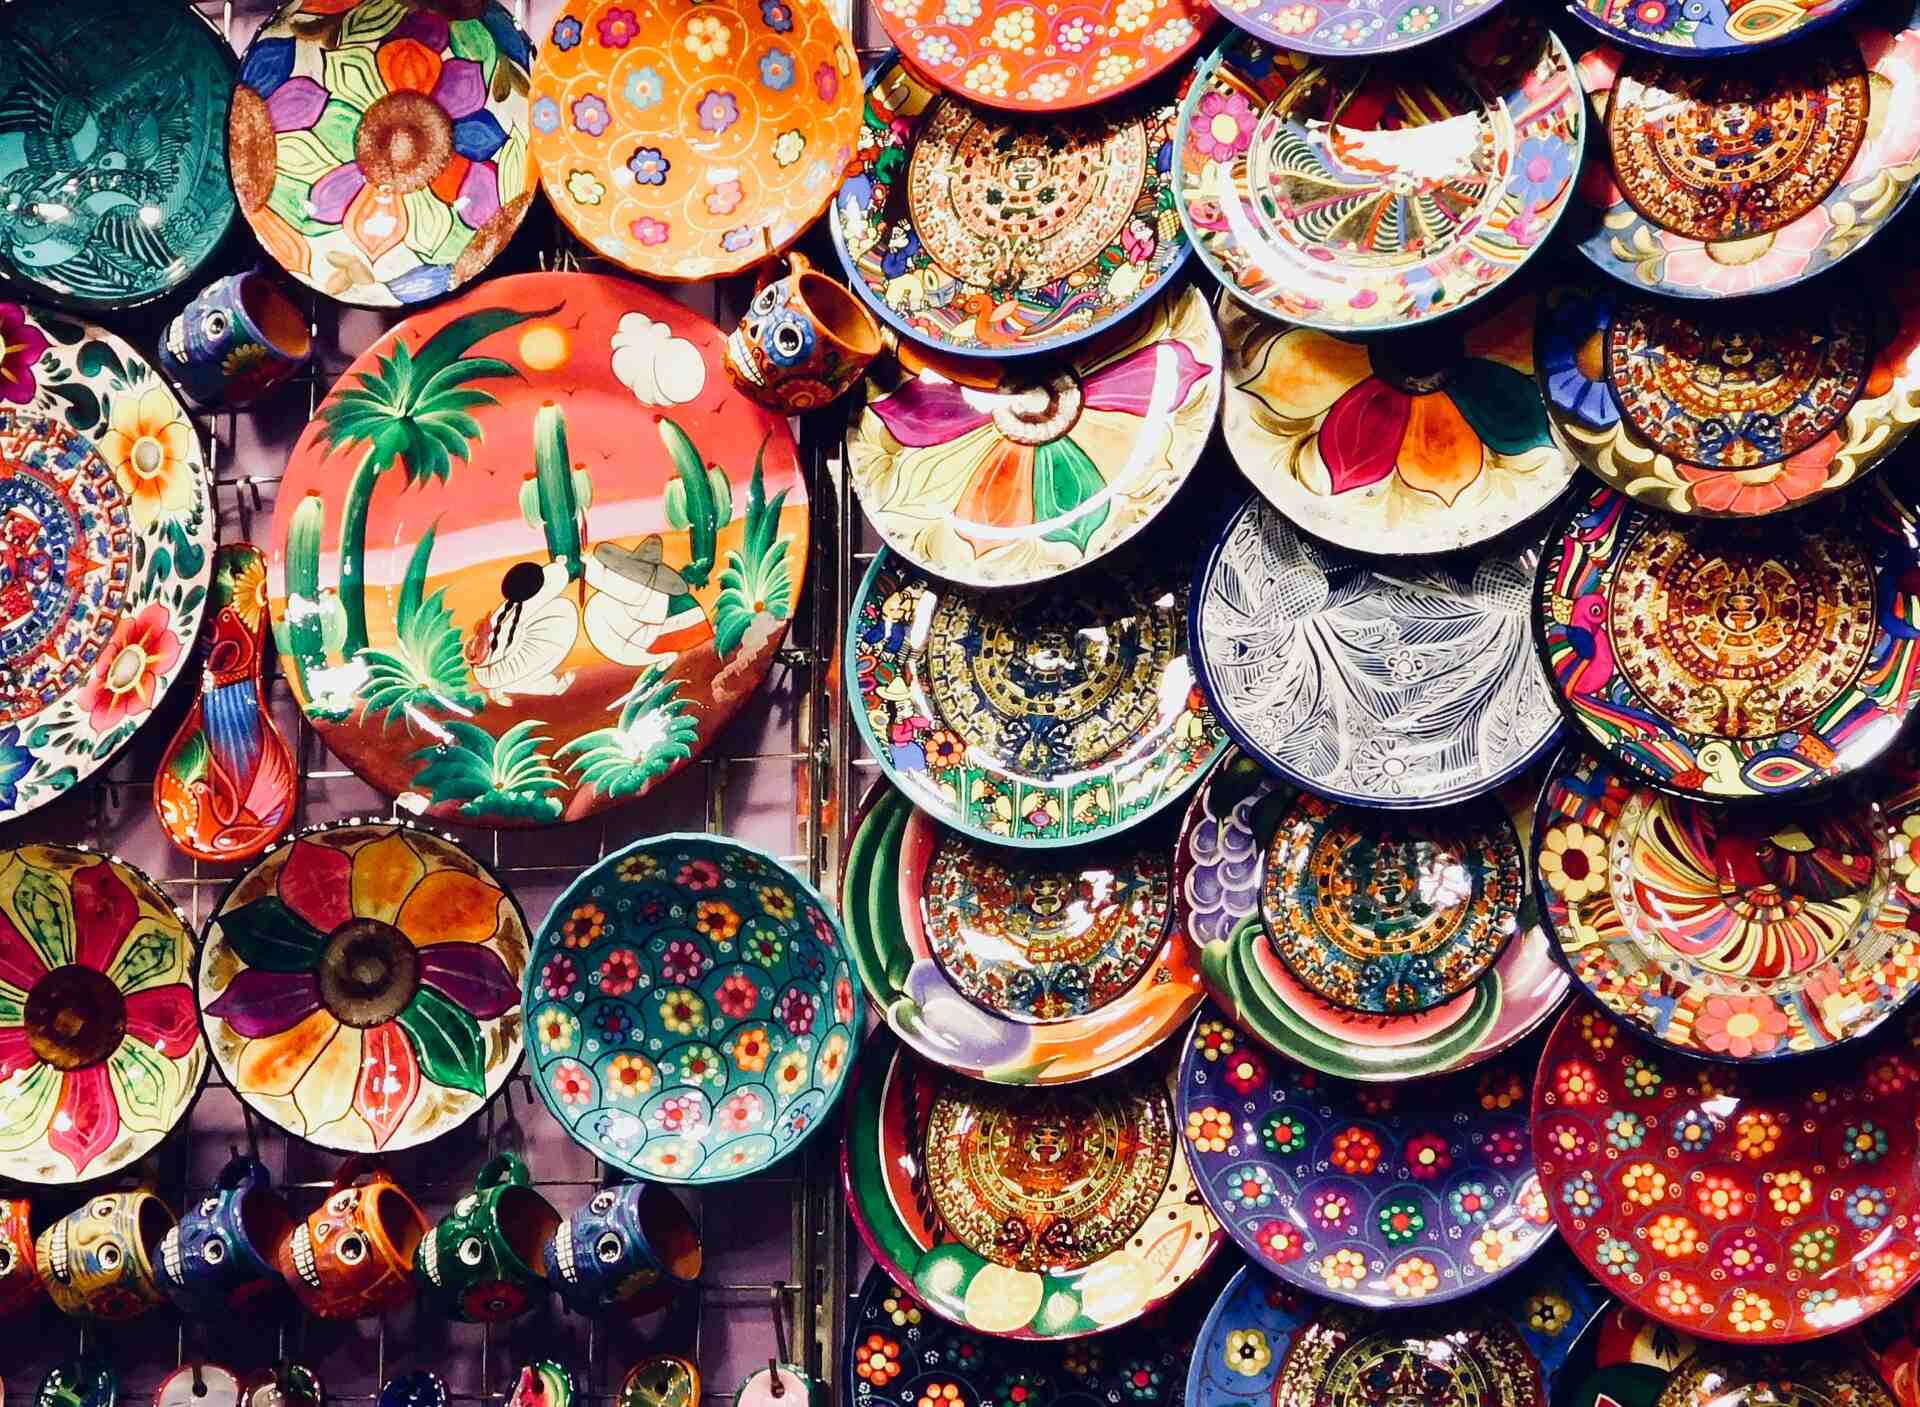 Many brightly colored plates